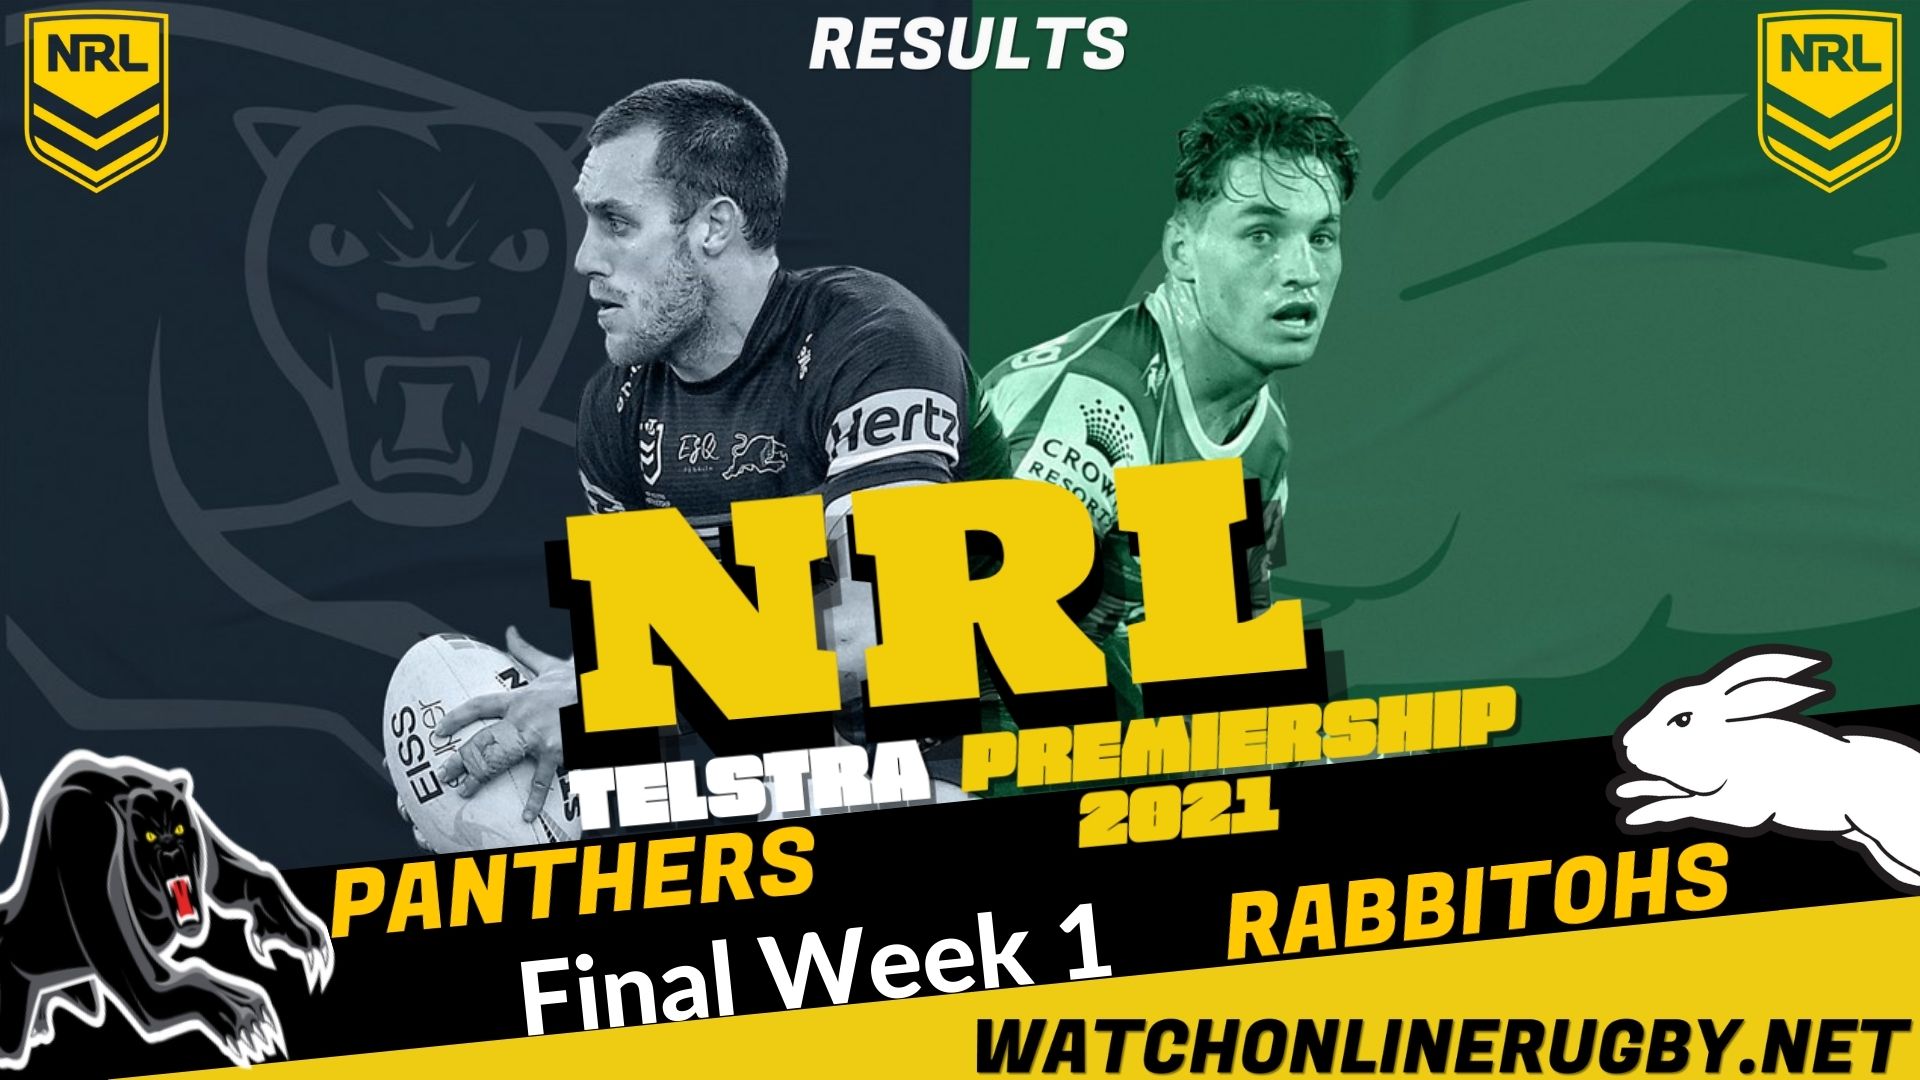 Panthers Vs Rabbitohs Highlights Final Week 1 NRL Rugby